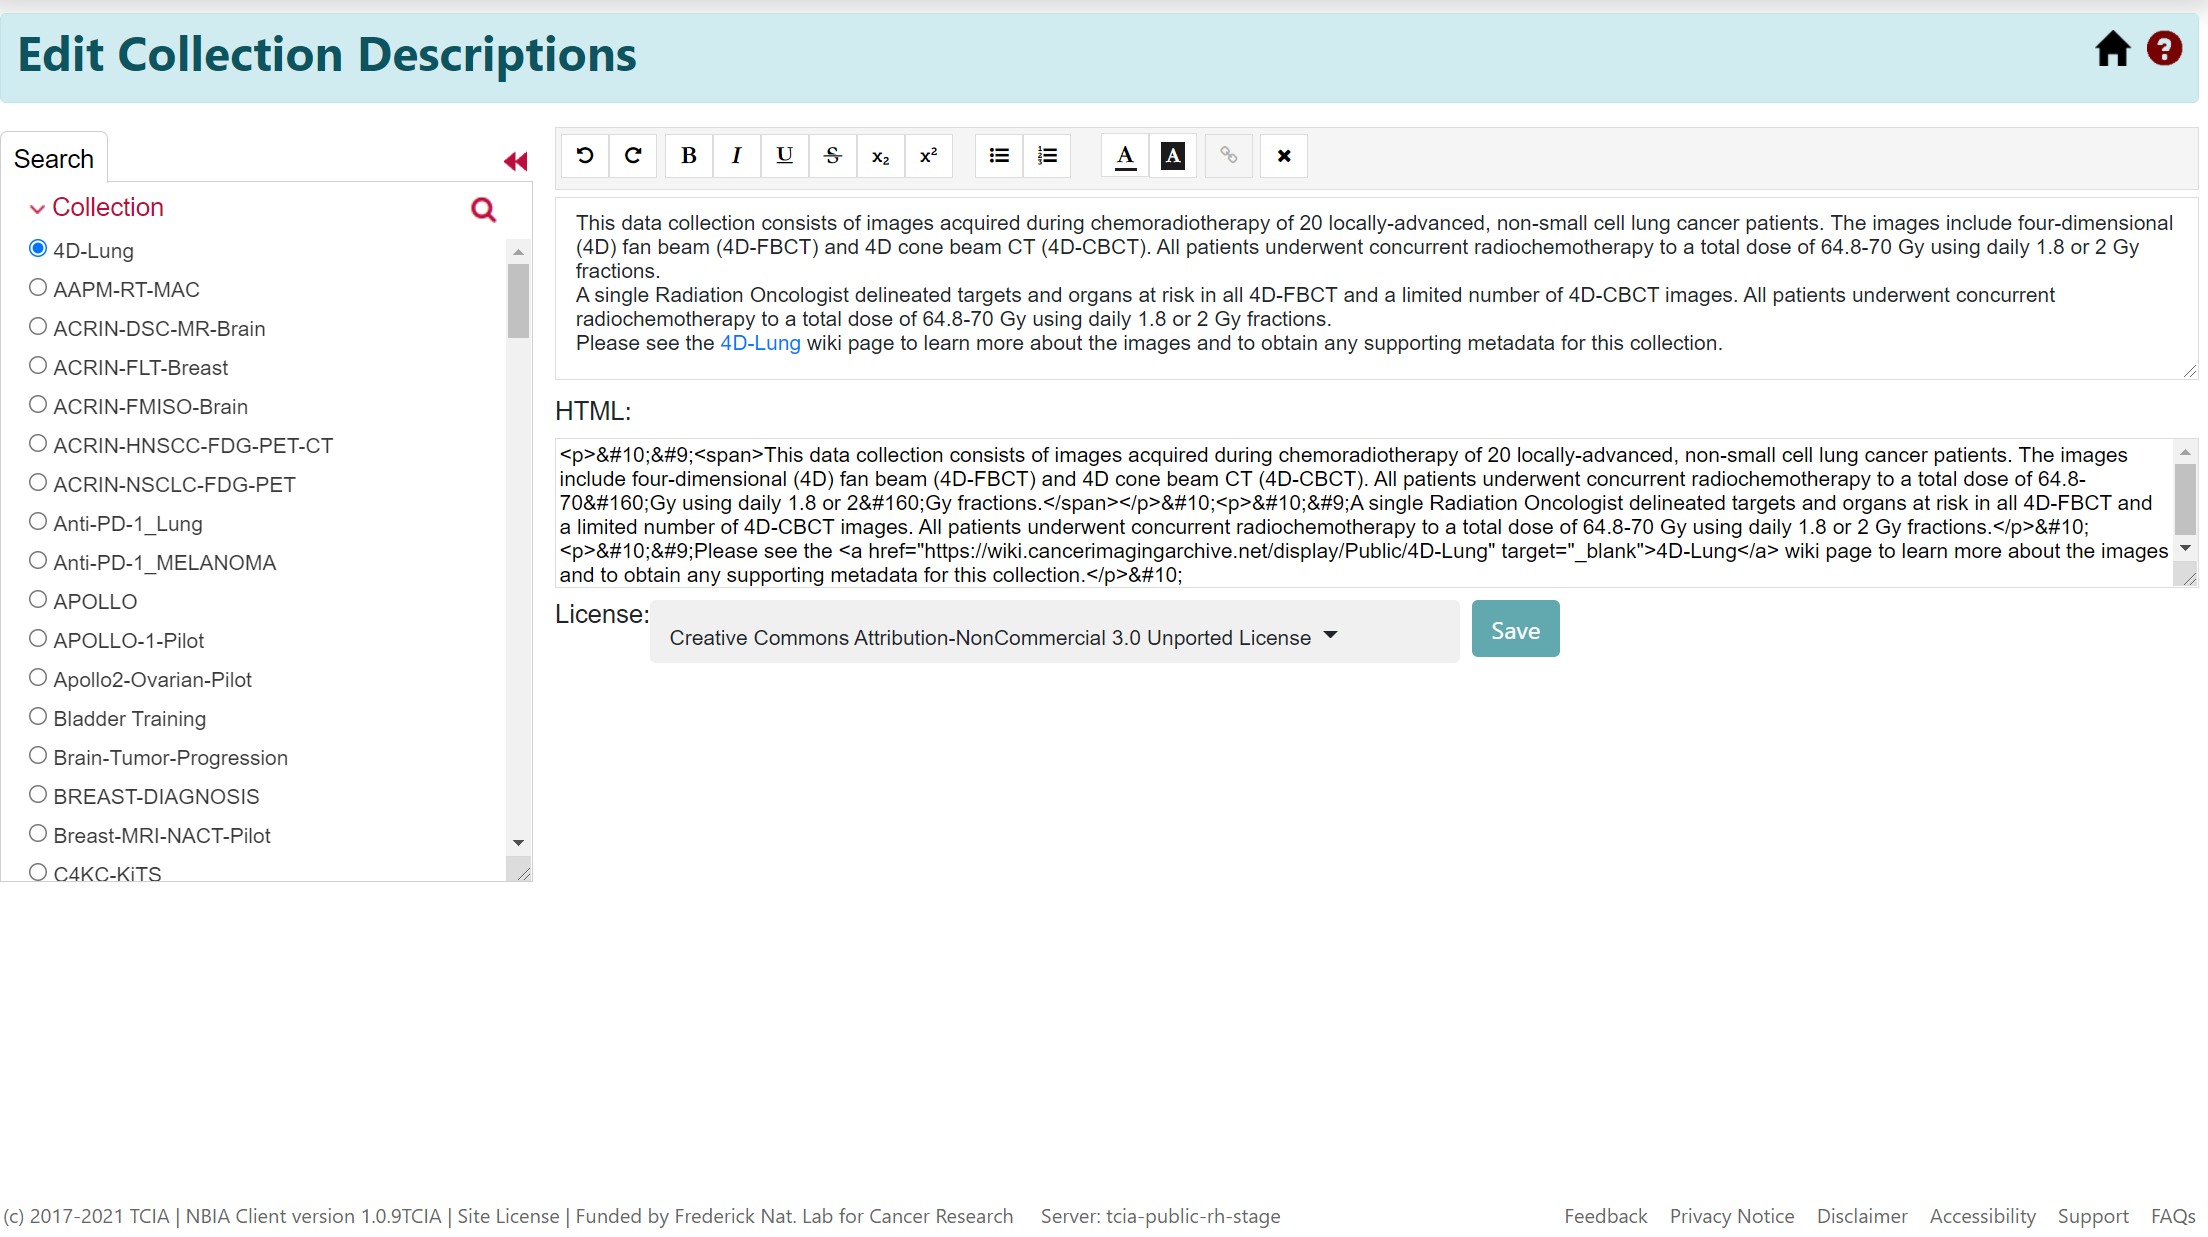 Edit Collection Descriptions page showing and editable description in both text and HTML, a license dropdown list, and a Save button.